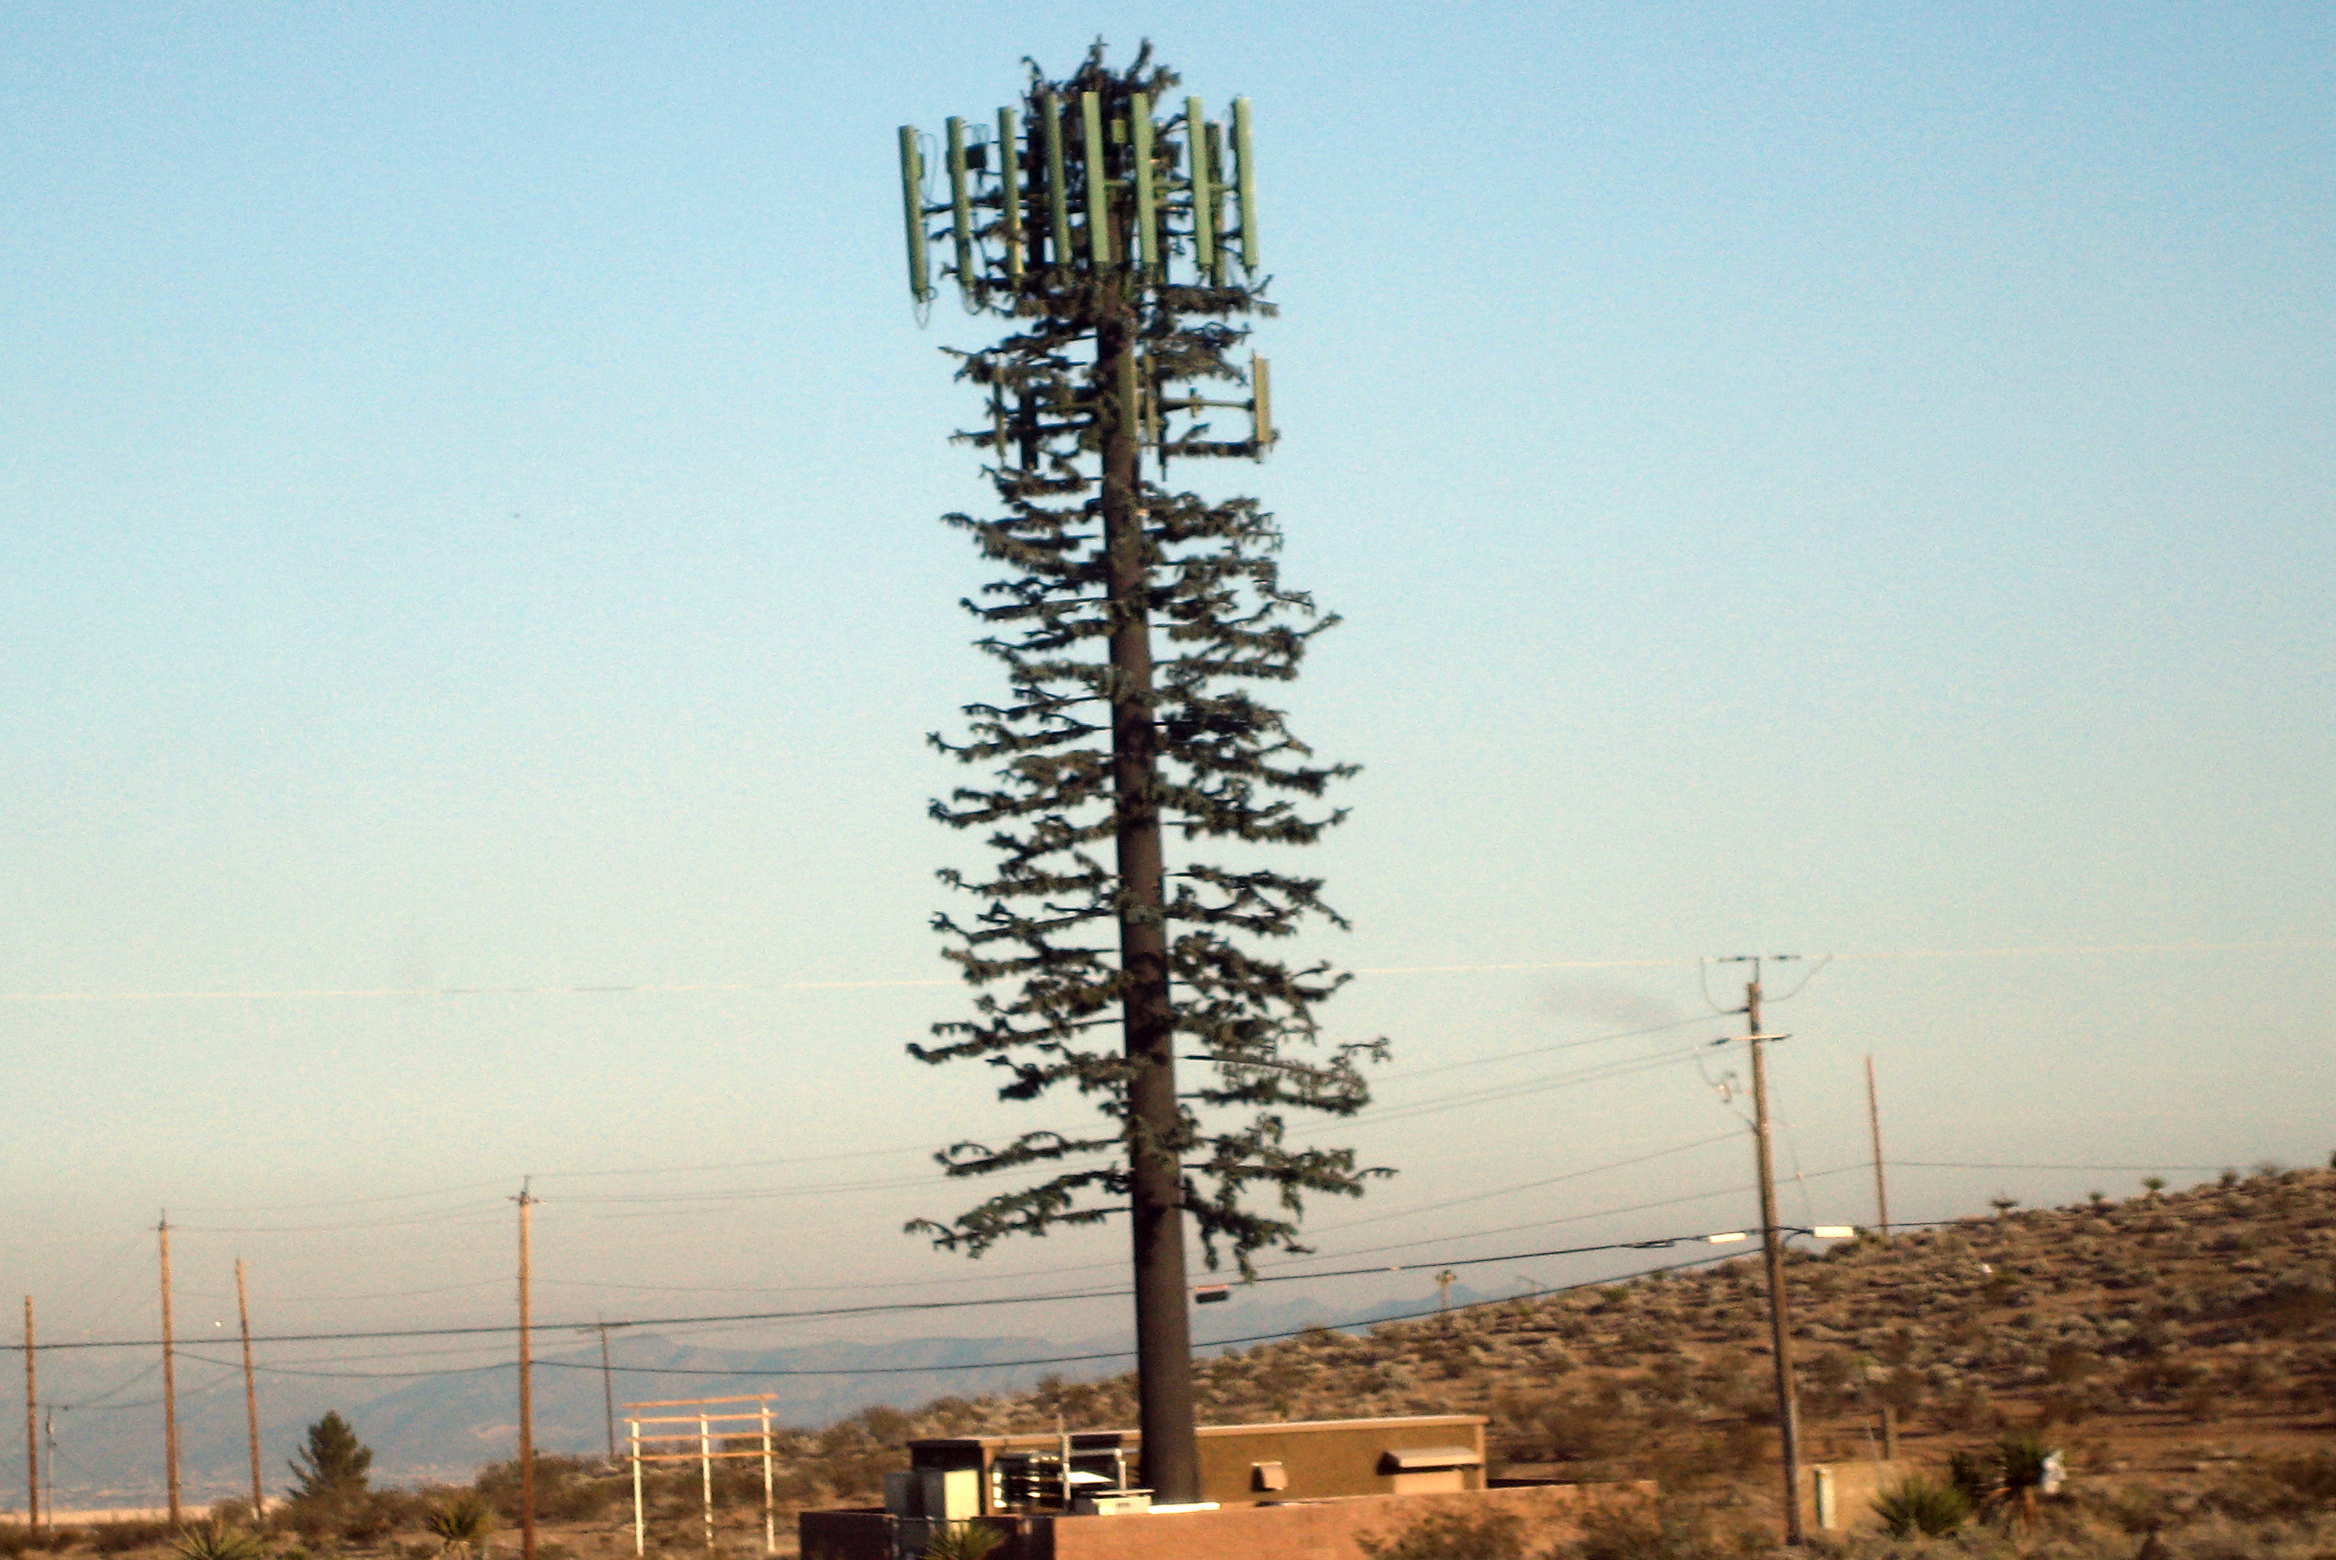 A cell phone tower image with a lot of antenna